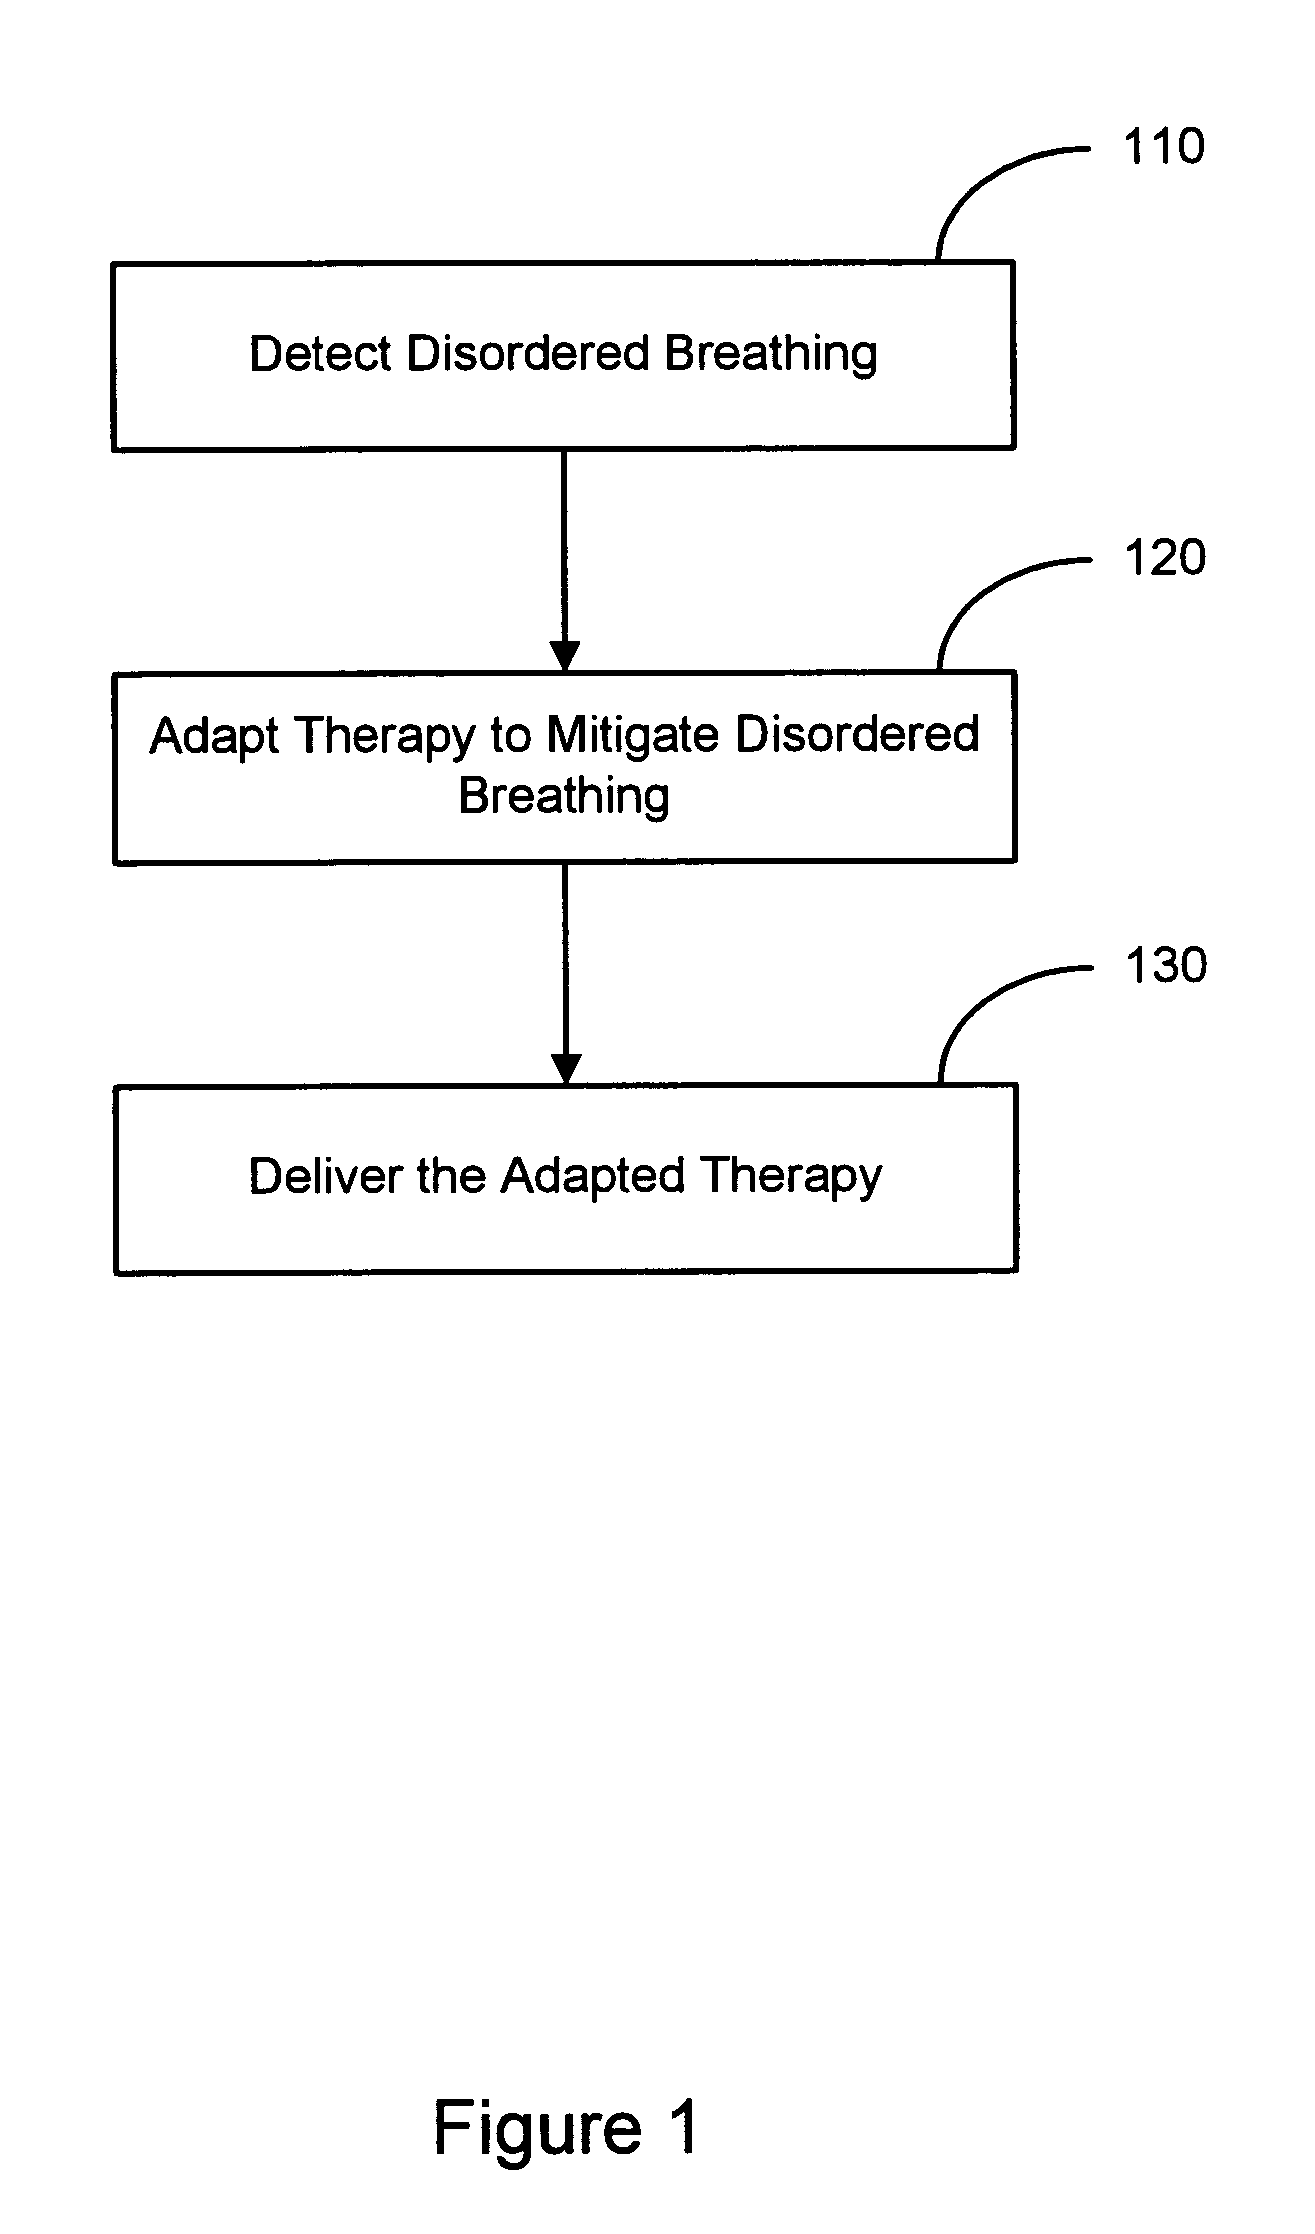 Adaptive therapy for disordered breathing